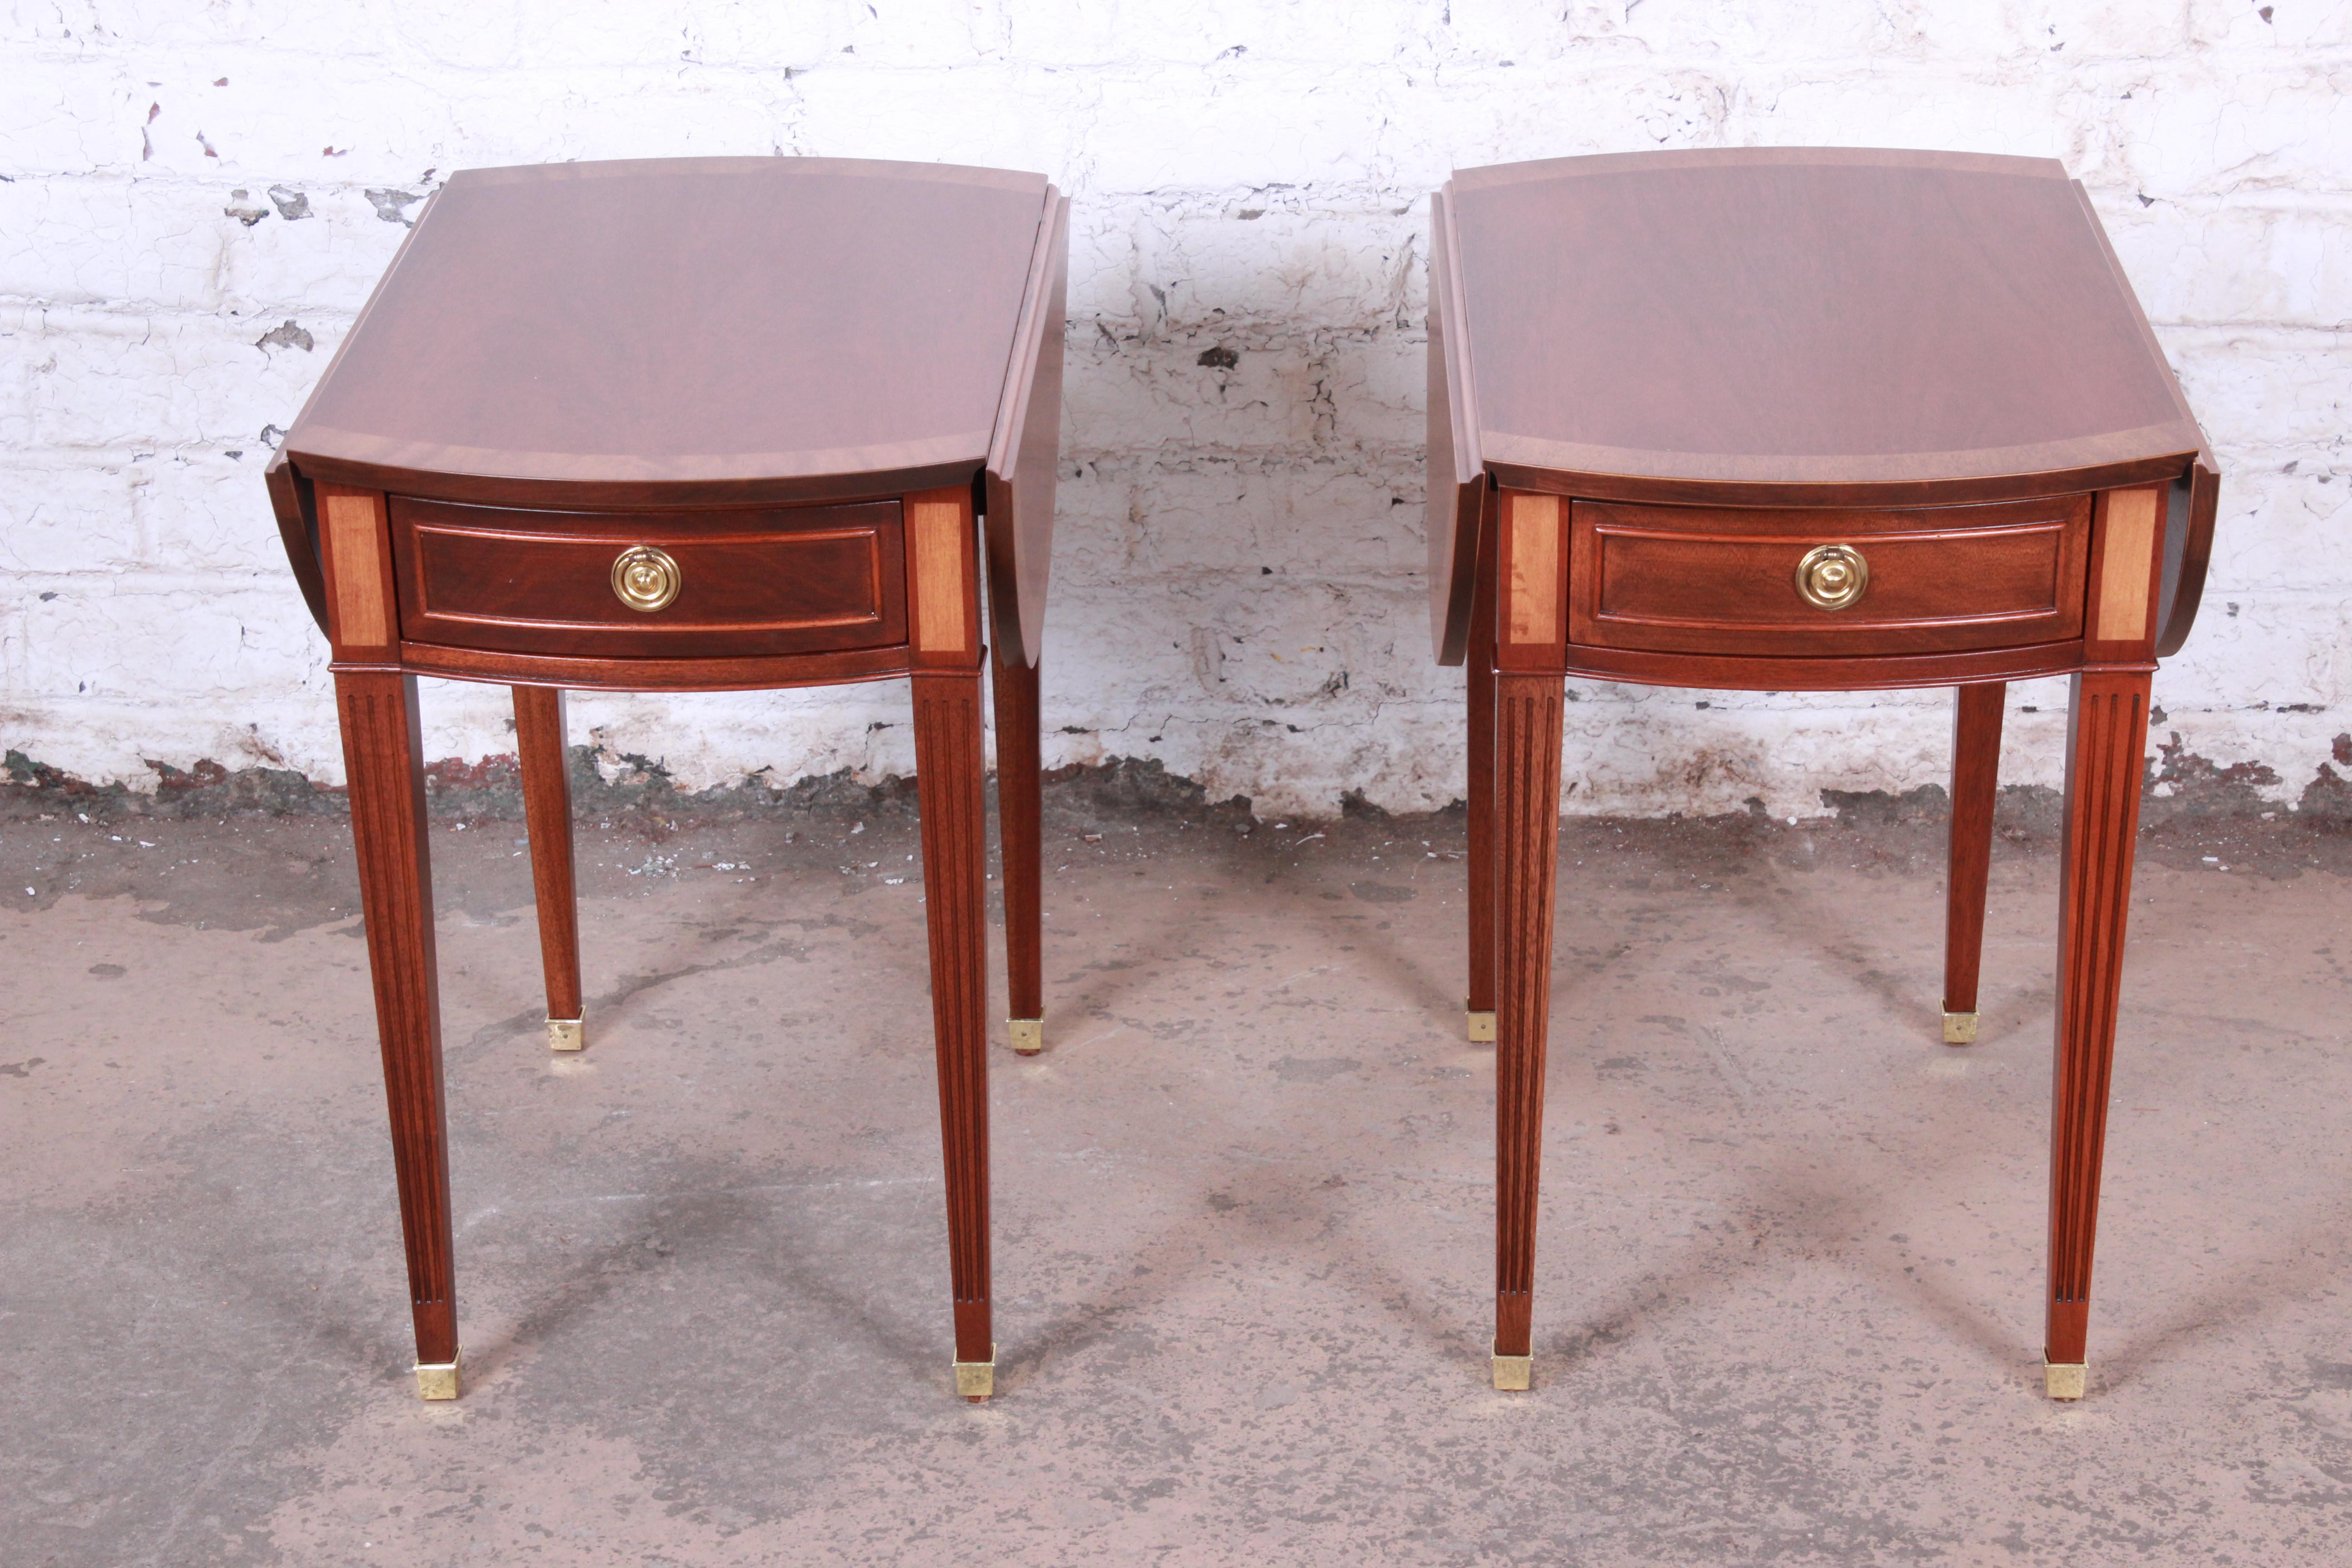 An exceptional pair of Georgian style banded mahogany drop-leaf pembroke side tables by Baker Furniture. The tables feature gorgeous mahogany wood grain with a banded edge and beautiful inlaid details. They offer good storage, each with a single